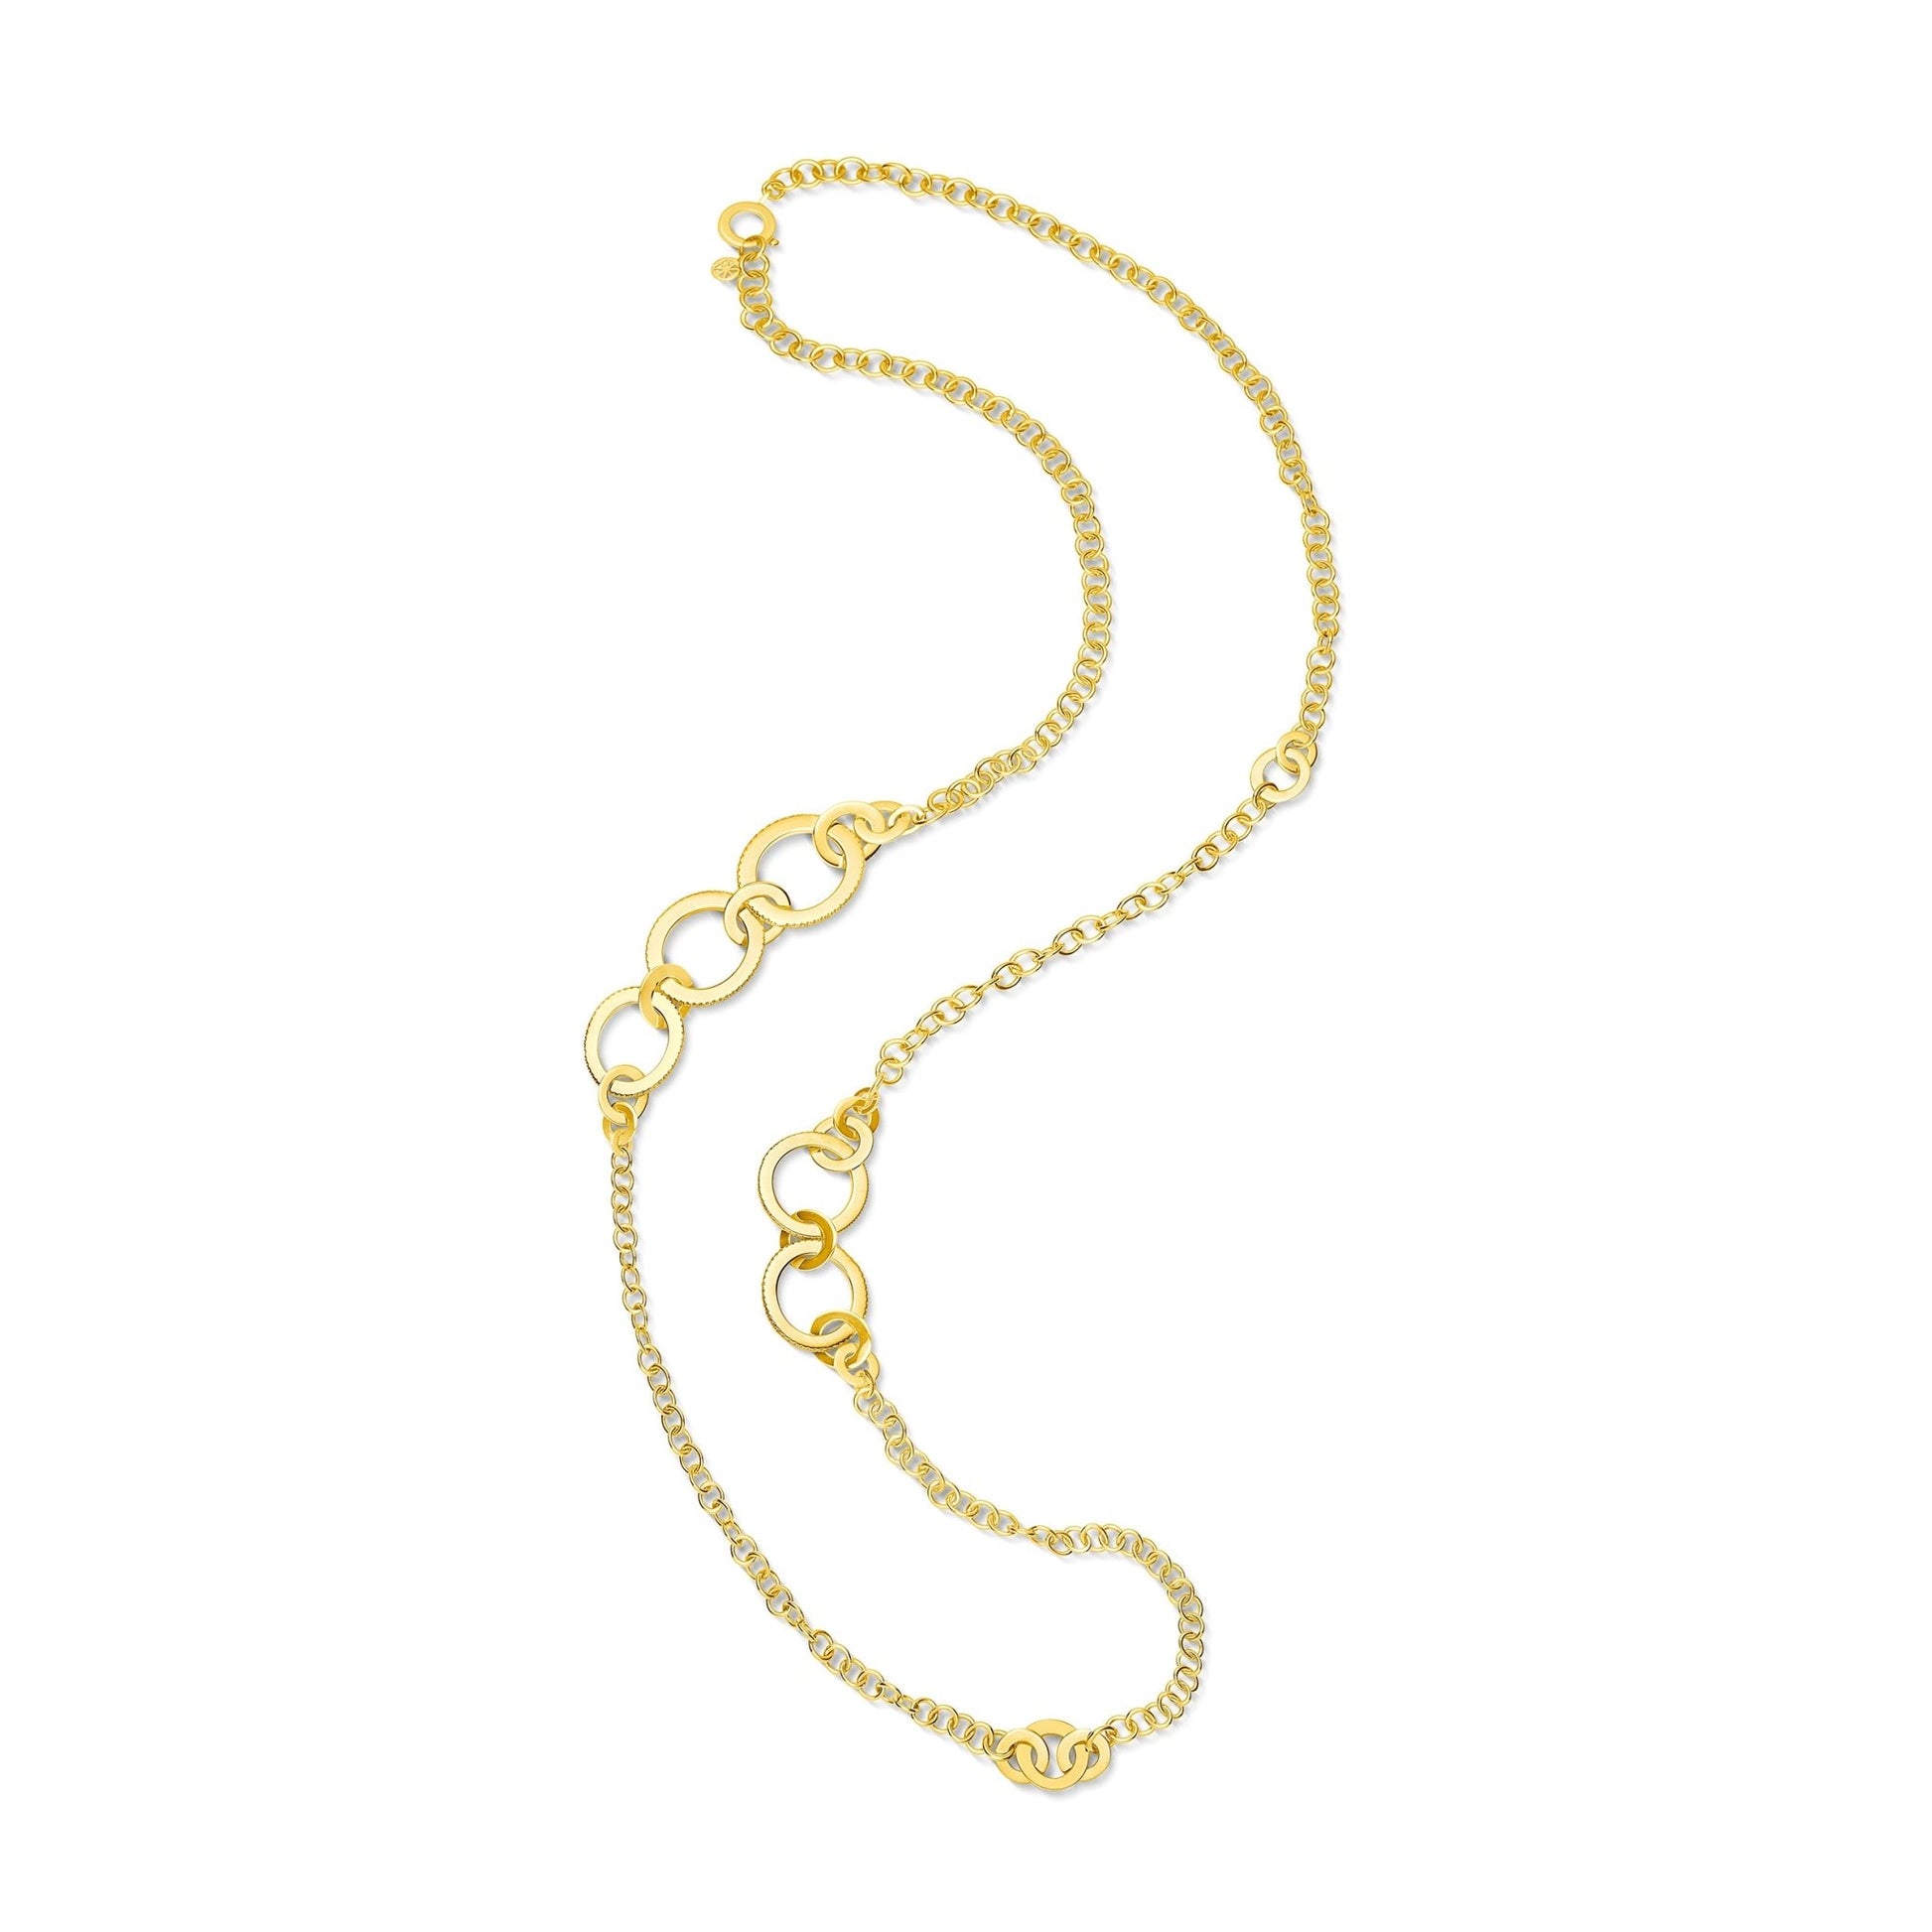 Yellow Gold Solo Chain Link Necklace with White Diamonds - Cadar